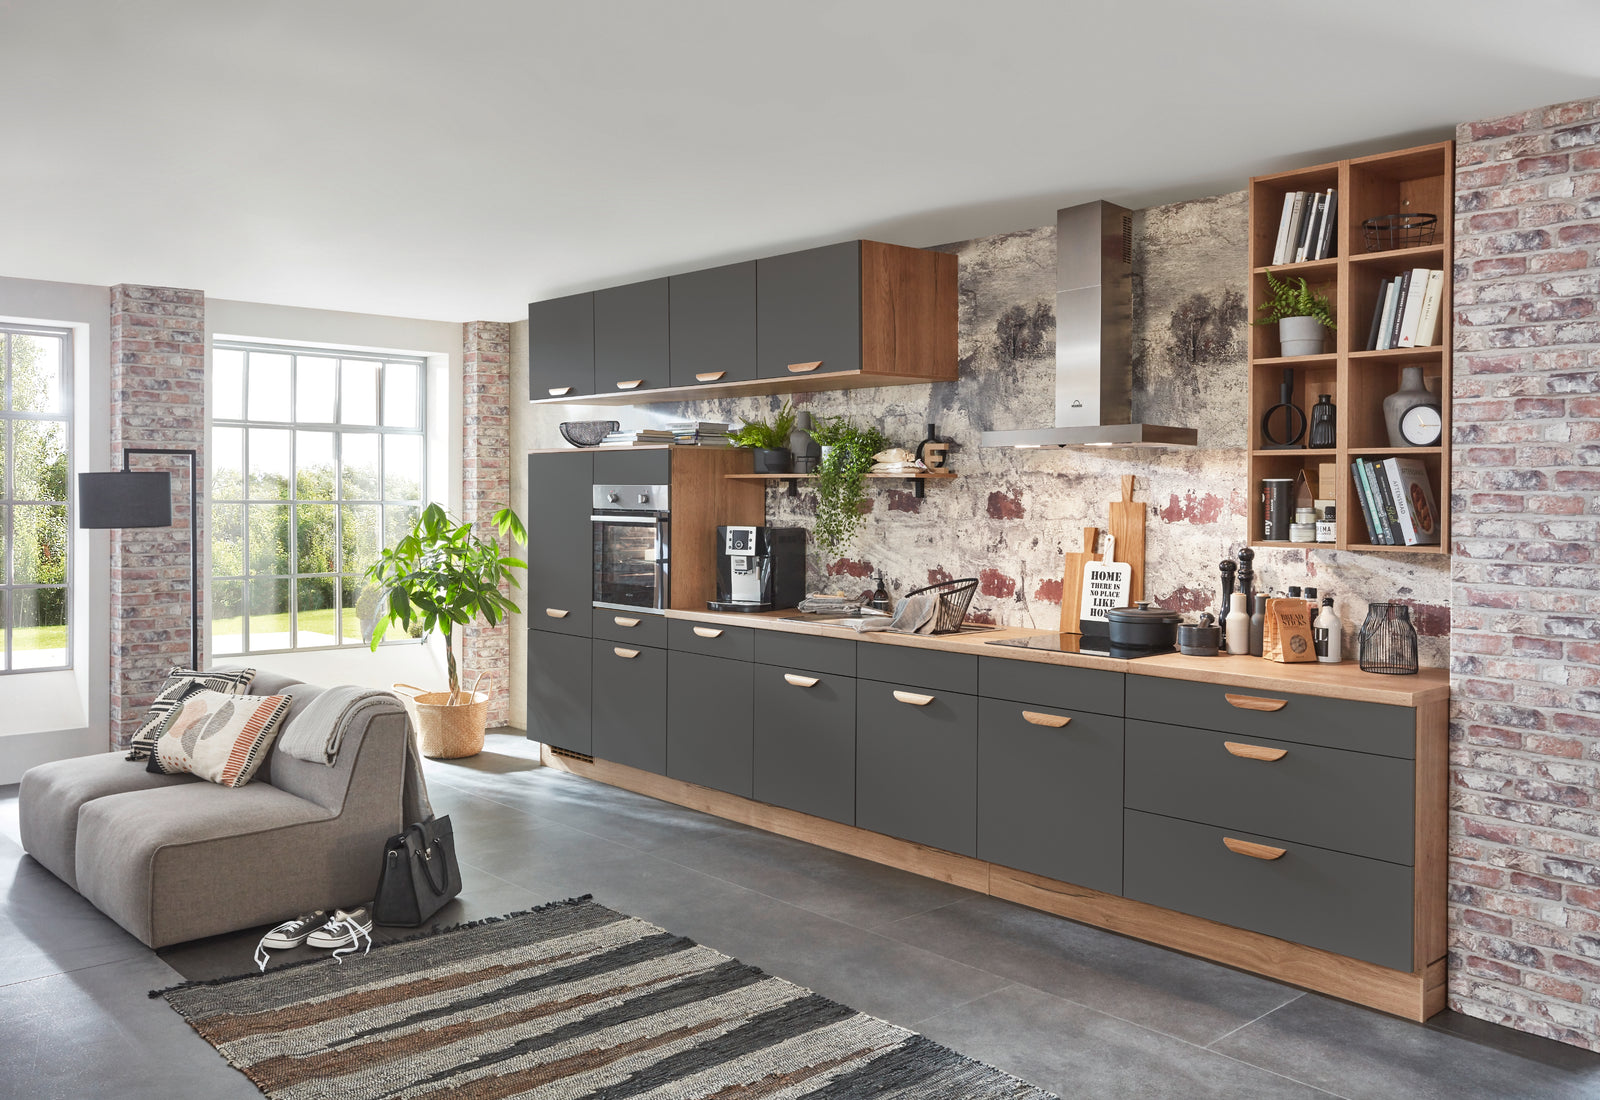 Single-line kitchens: the traditional shape combines all kitchen